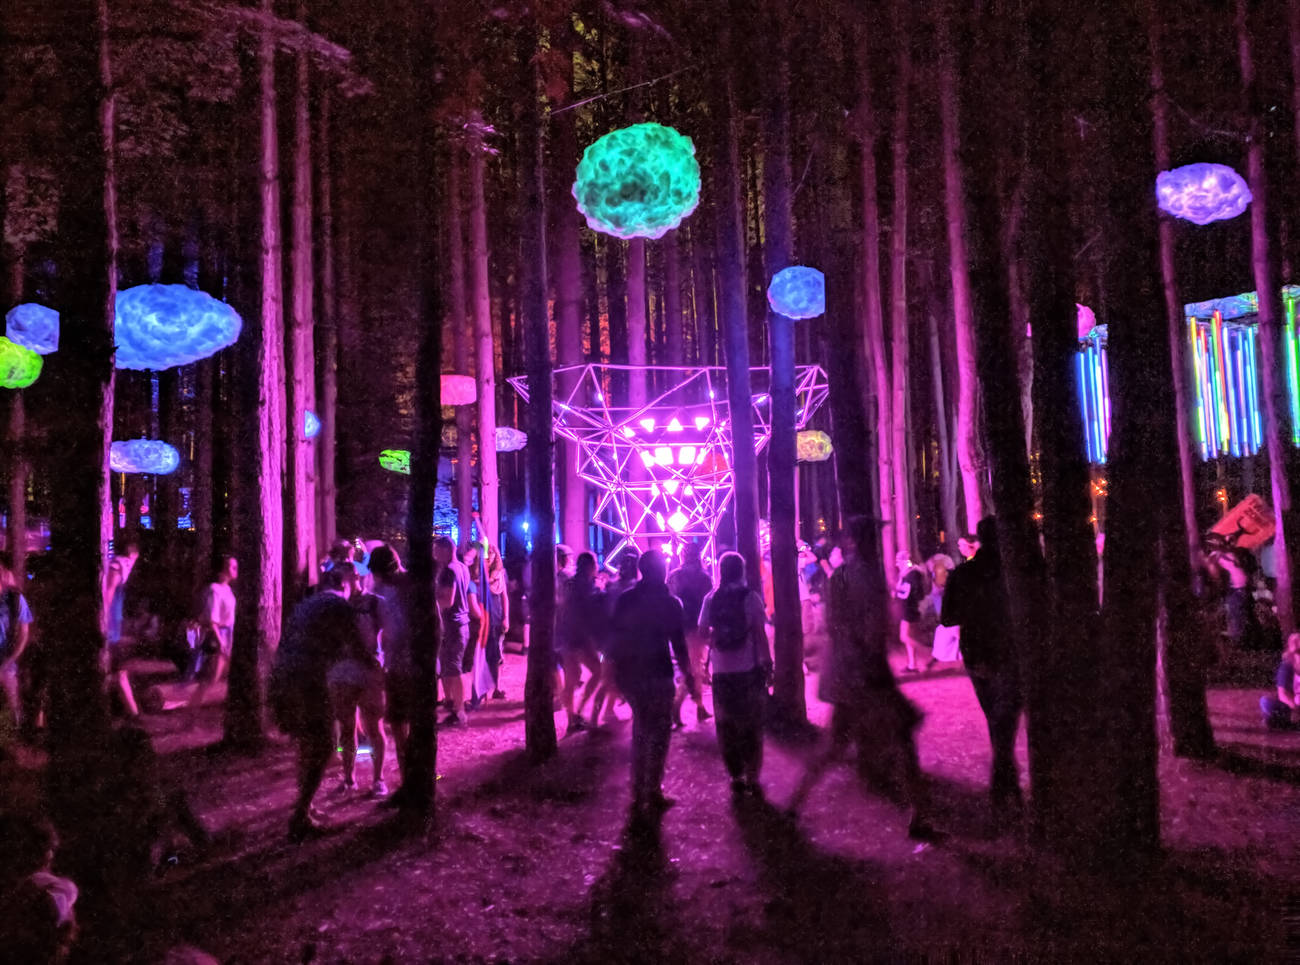 Pink light pattern on Event Horizon at Electric Forest 2016